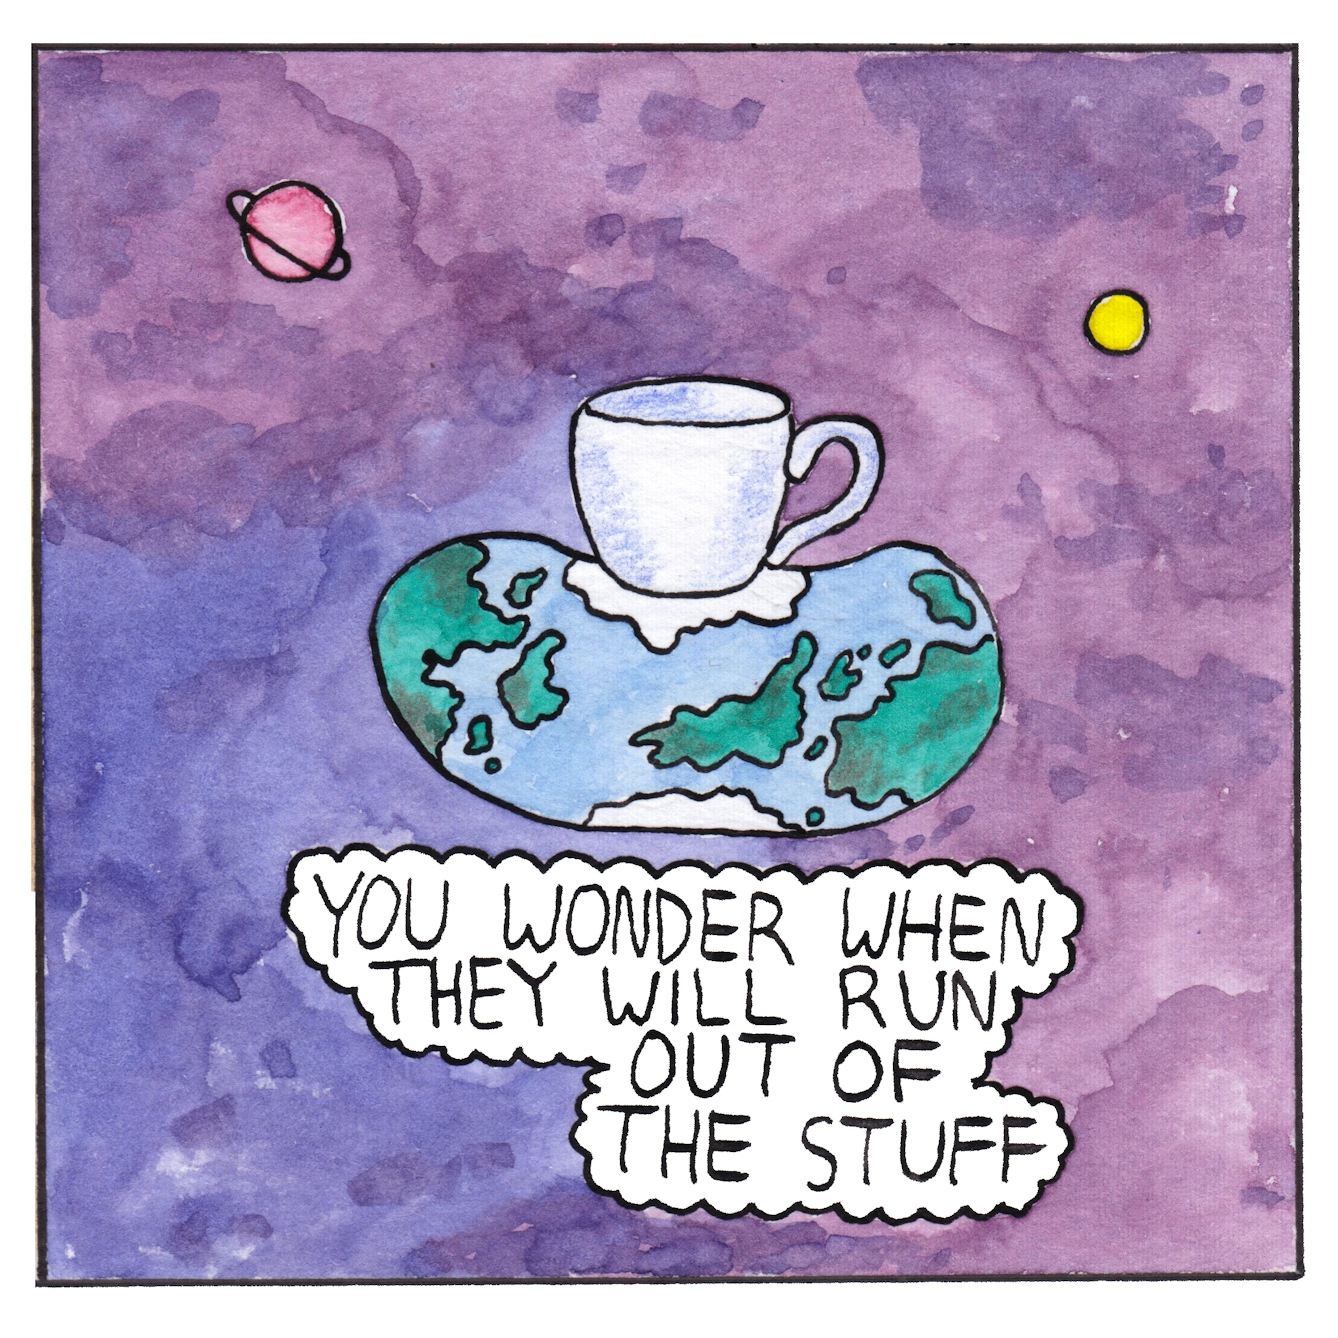 Panel 6 of a six-panel comic made with ink, watercolour and colour pencils: A gigantic white tea cup is balanced on top of the planet earth, seen from outer space. The weight of the cup has squashed the earth into an oblong shape. Beyond hte earth are two small planets in the distance. A text bubble below the earth reads: “You wonder when they will run out of the stuff”